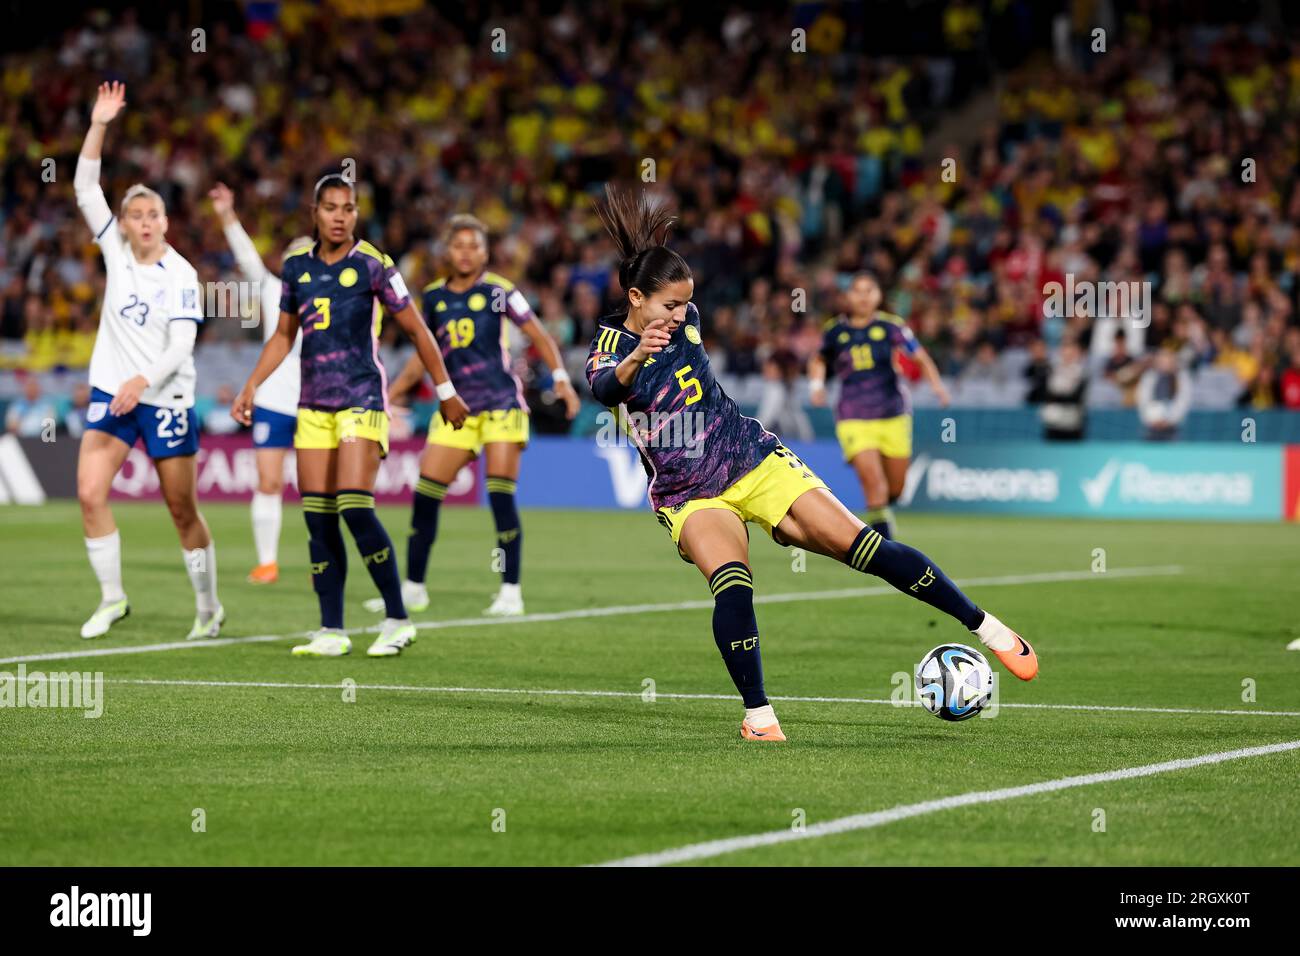 Sydney, Australia, 12 August, 2023. Lorena Bedoya Durango of Colombia clears the ball during the Women's World Cup quarter final football match between the England and Colombia at Stadium Australia on August 12, 2023 in Sydney, Australia. Credit: Damian Briggs/Speed Media/Alamy Live News Stock Photo